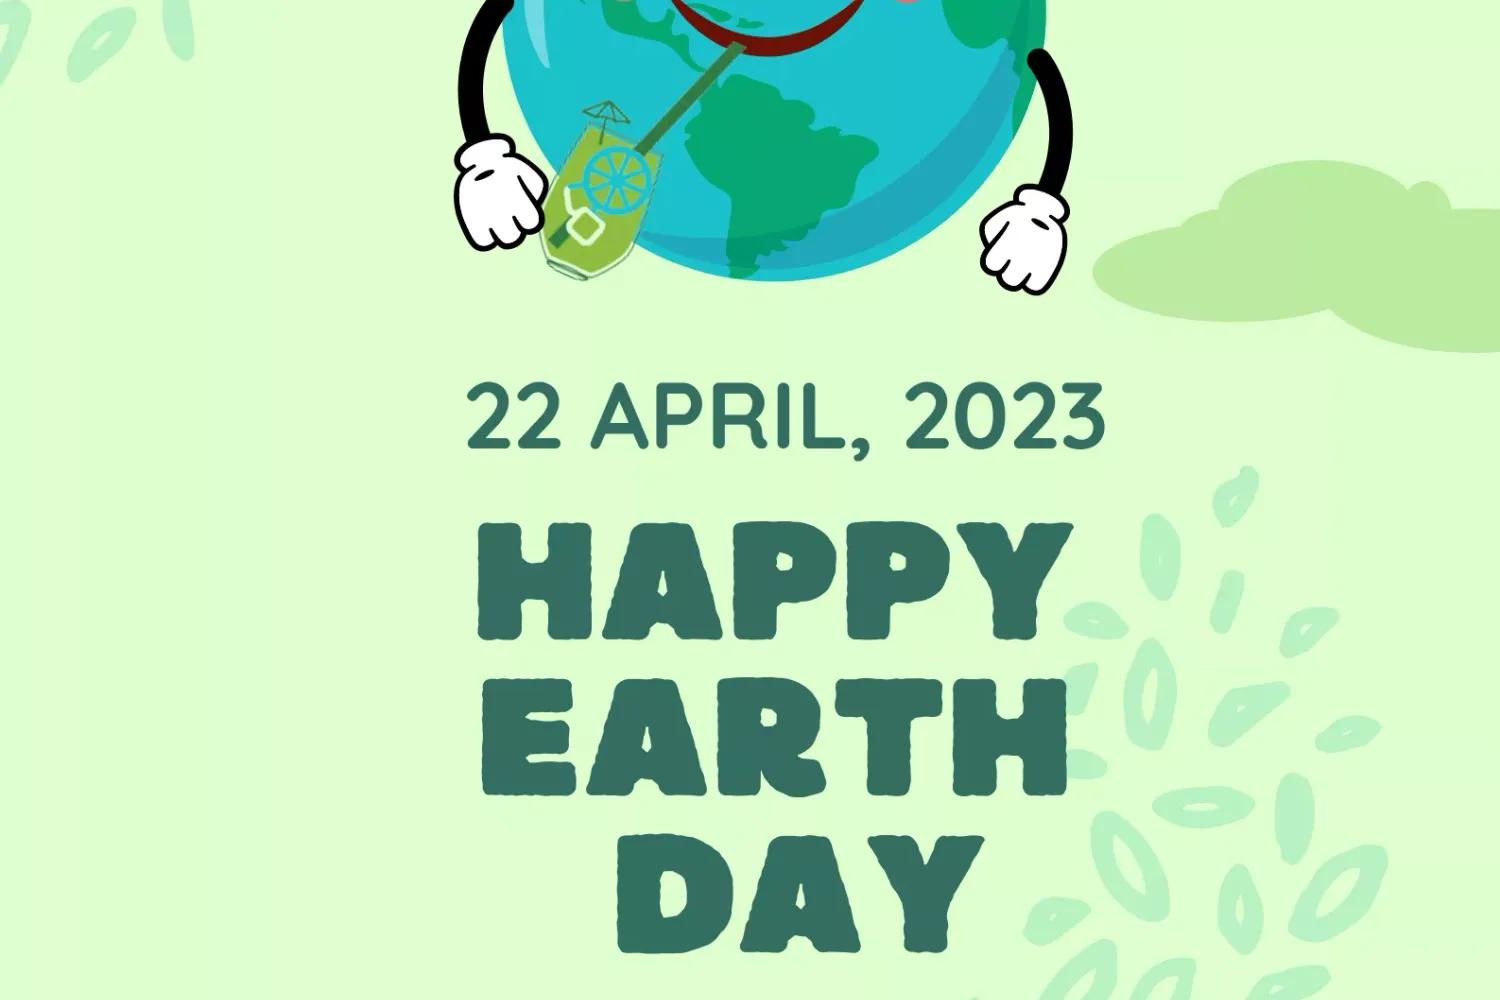 3 GREEN-LIVING TIPS TO CELEBRATE EARTH DAY 22.4